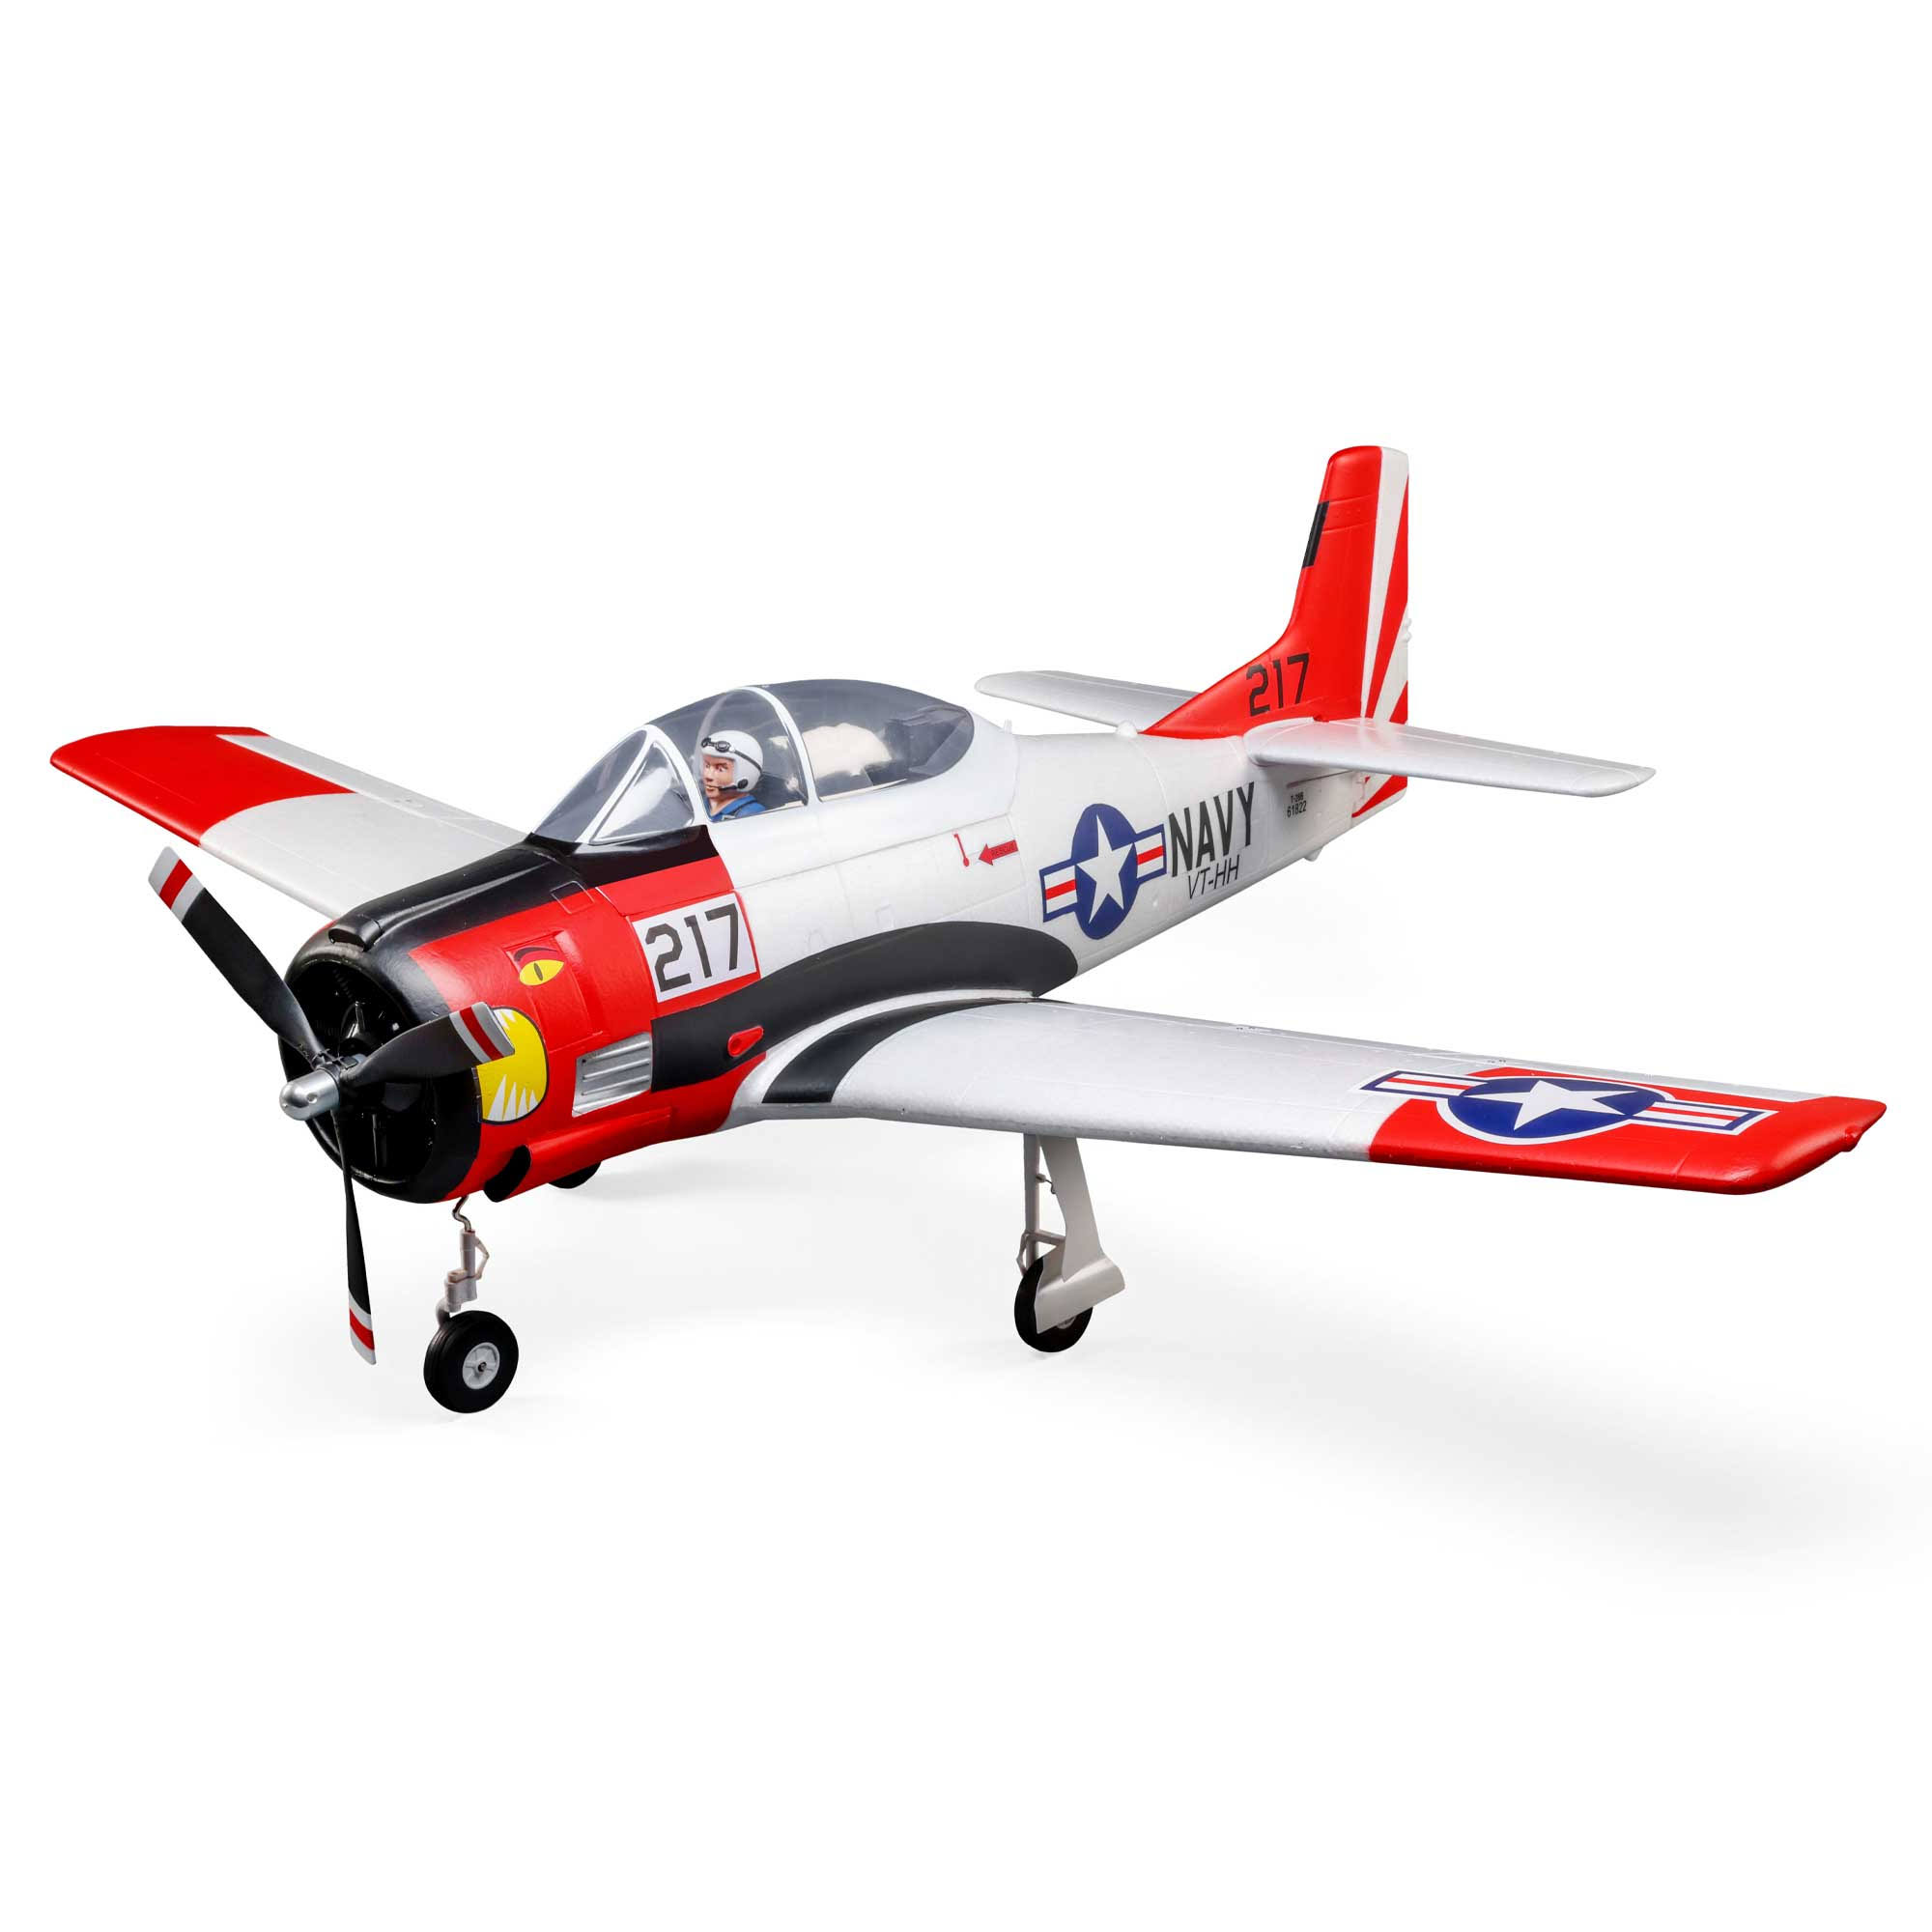 E-flite RC Airplane T-28 Trojan 1.2m BNF Basic (Transmitter, Battery and Charger Not Included) with Smart, EFL18350